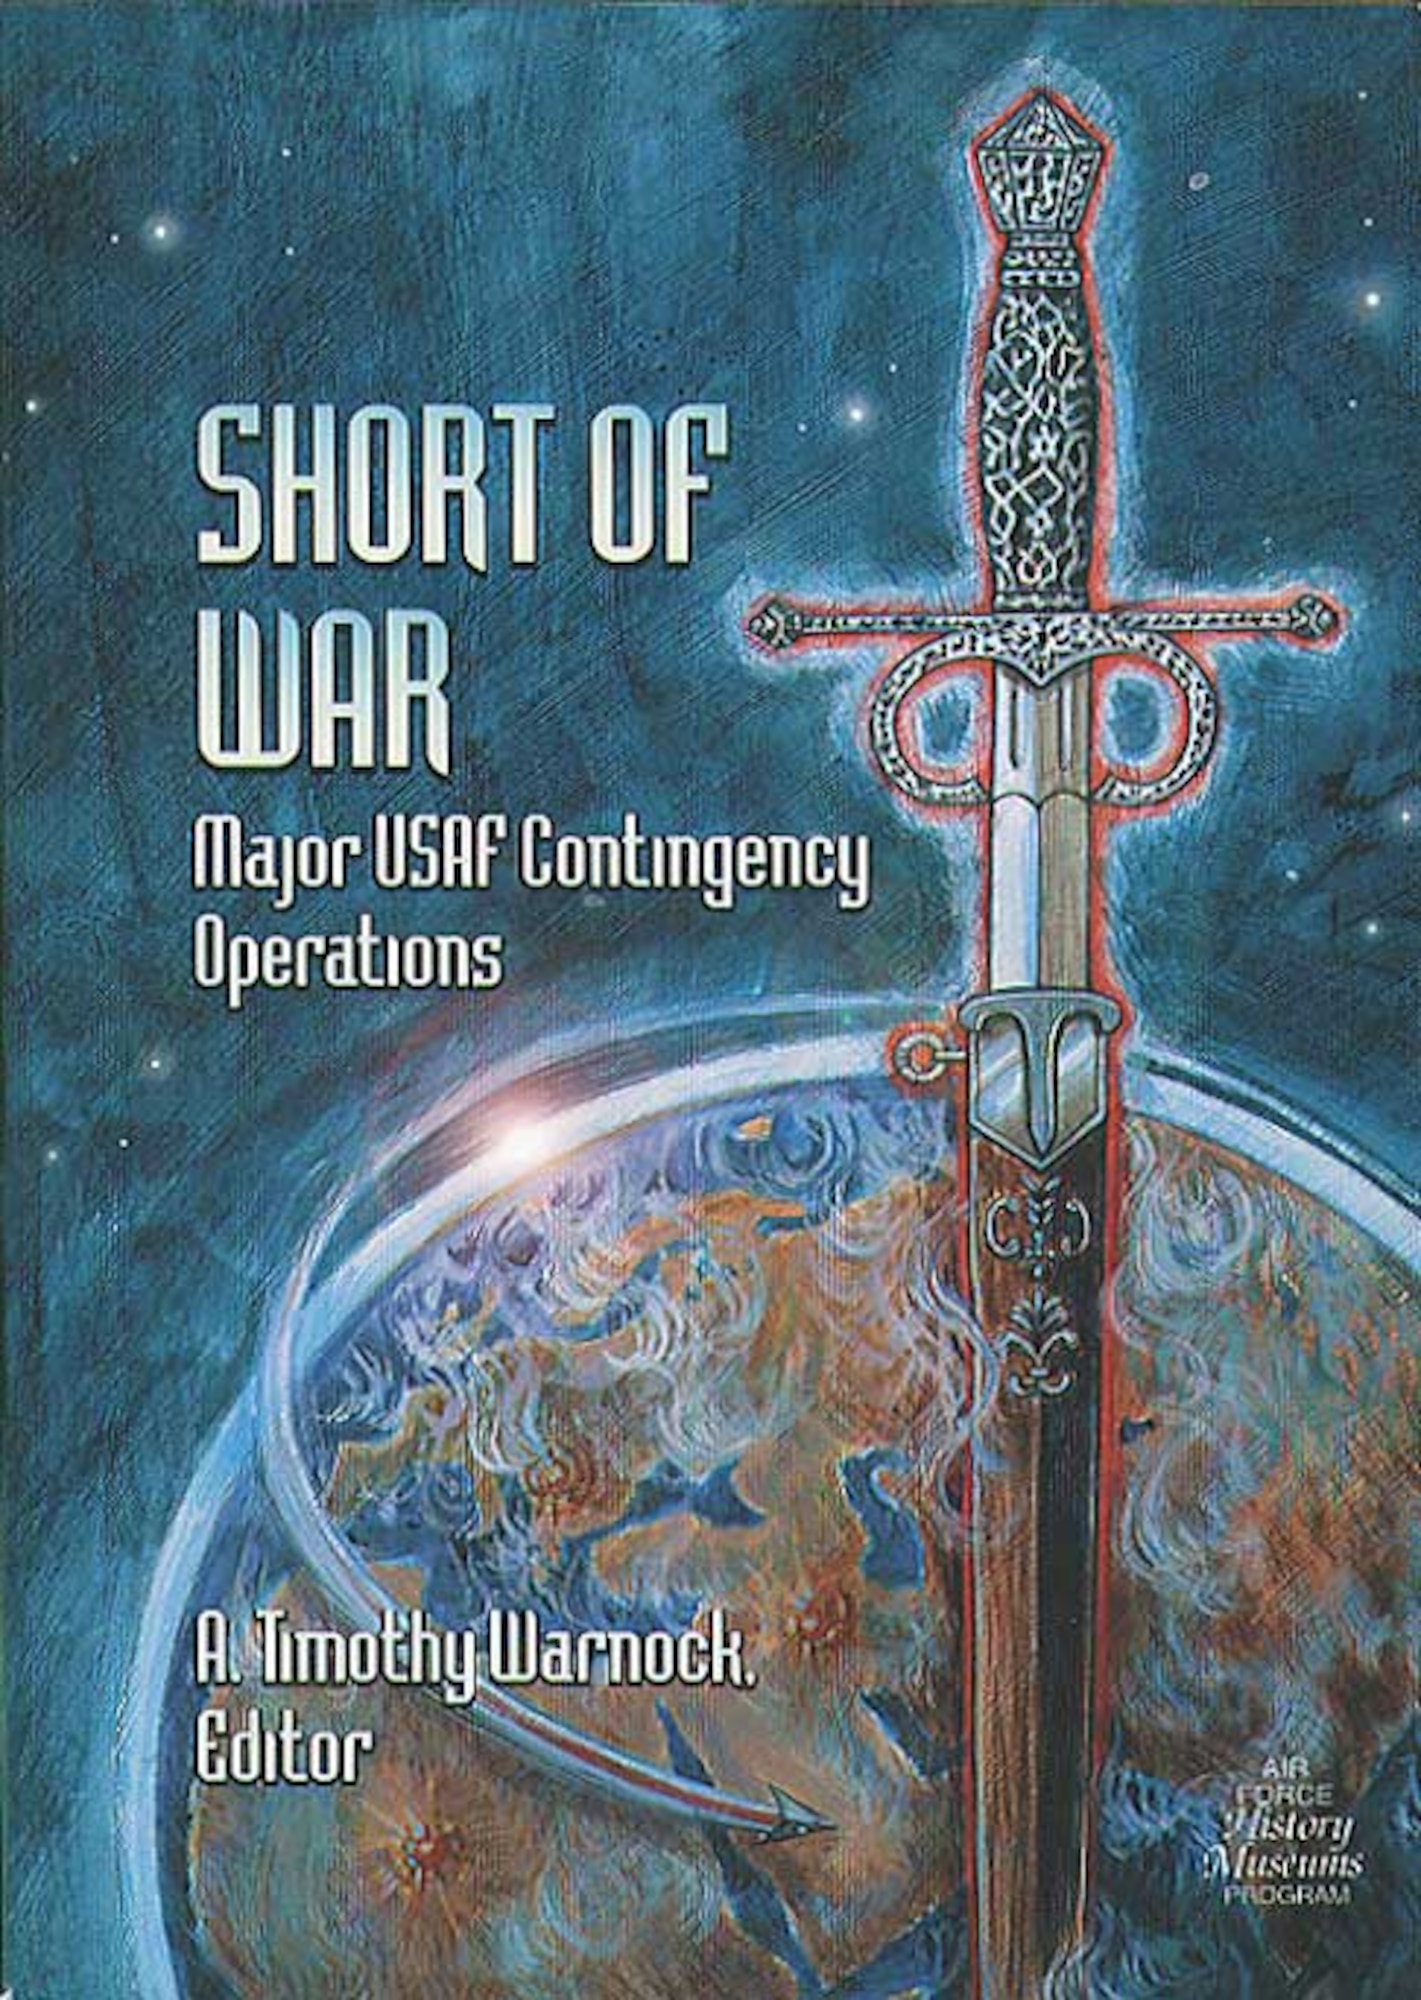 USAF participation in 23 contingency operations are summarized in this volume: including types of aircraft flown, and Air Force units involved.